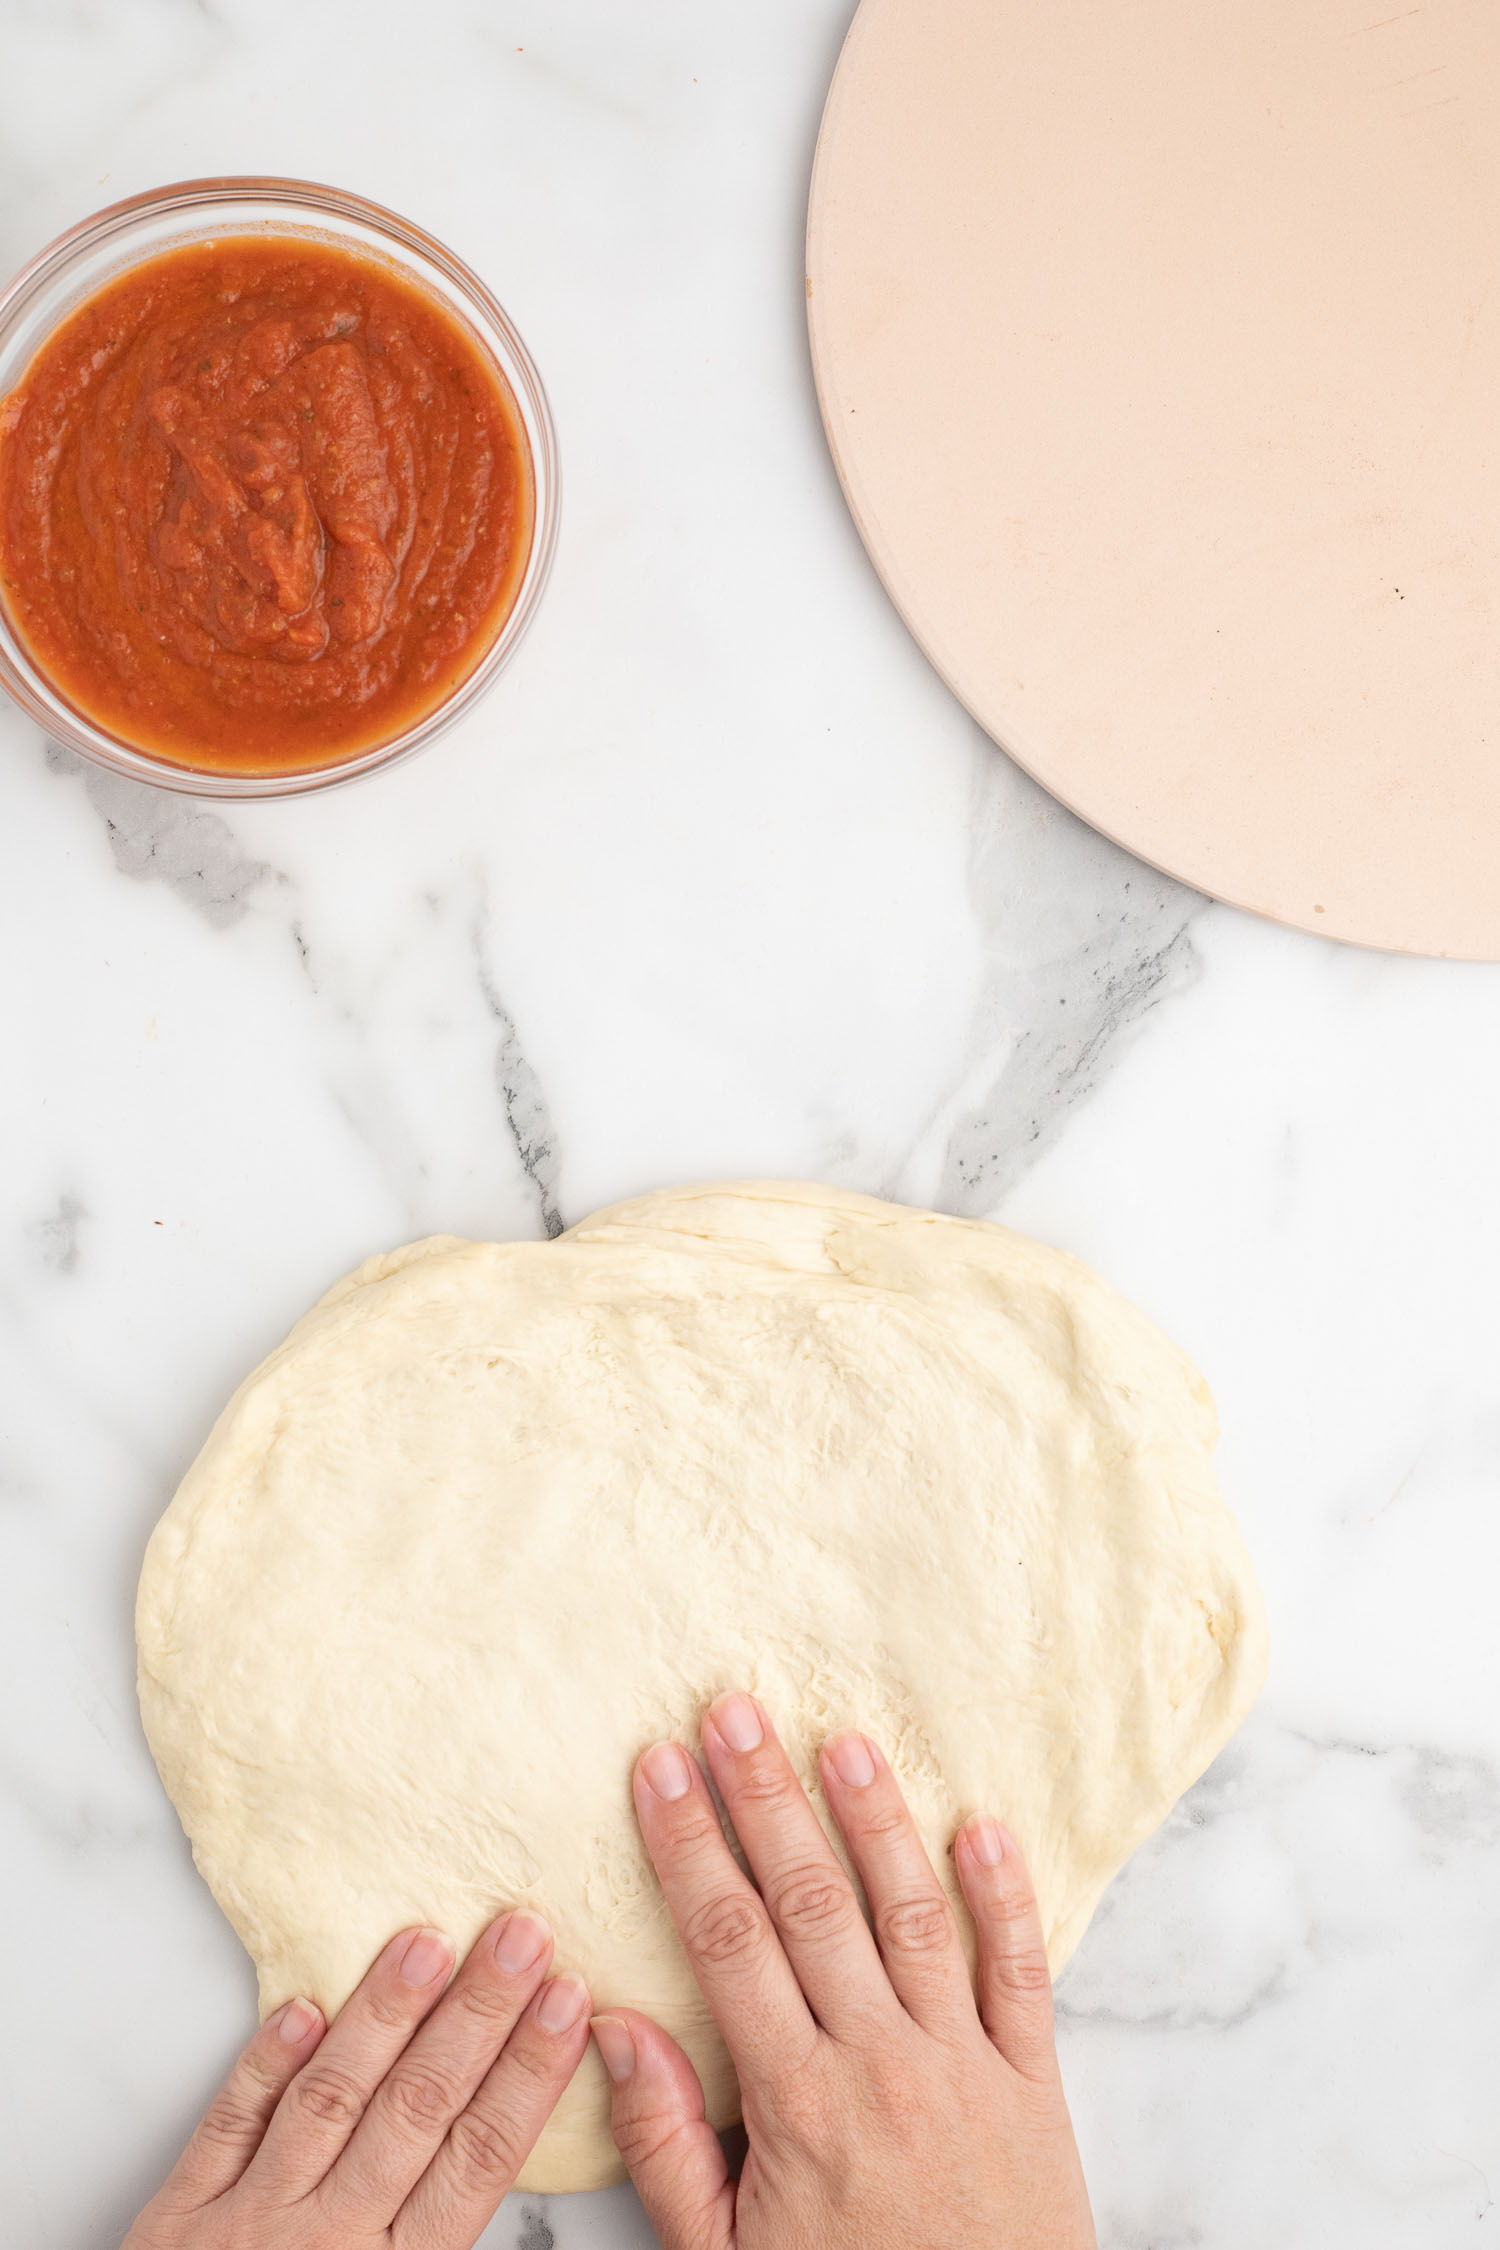 A pizza stone with a glass bowl of tomato sauce with a bunch of homemade pizza dough with two hands rolling it out.